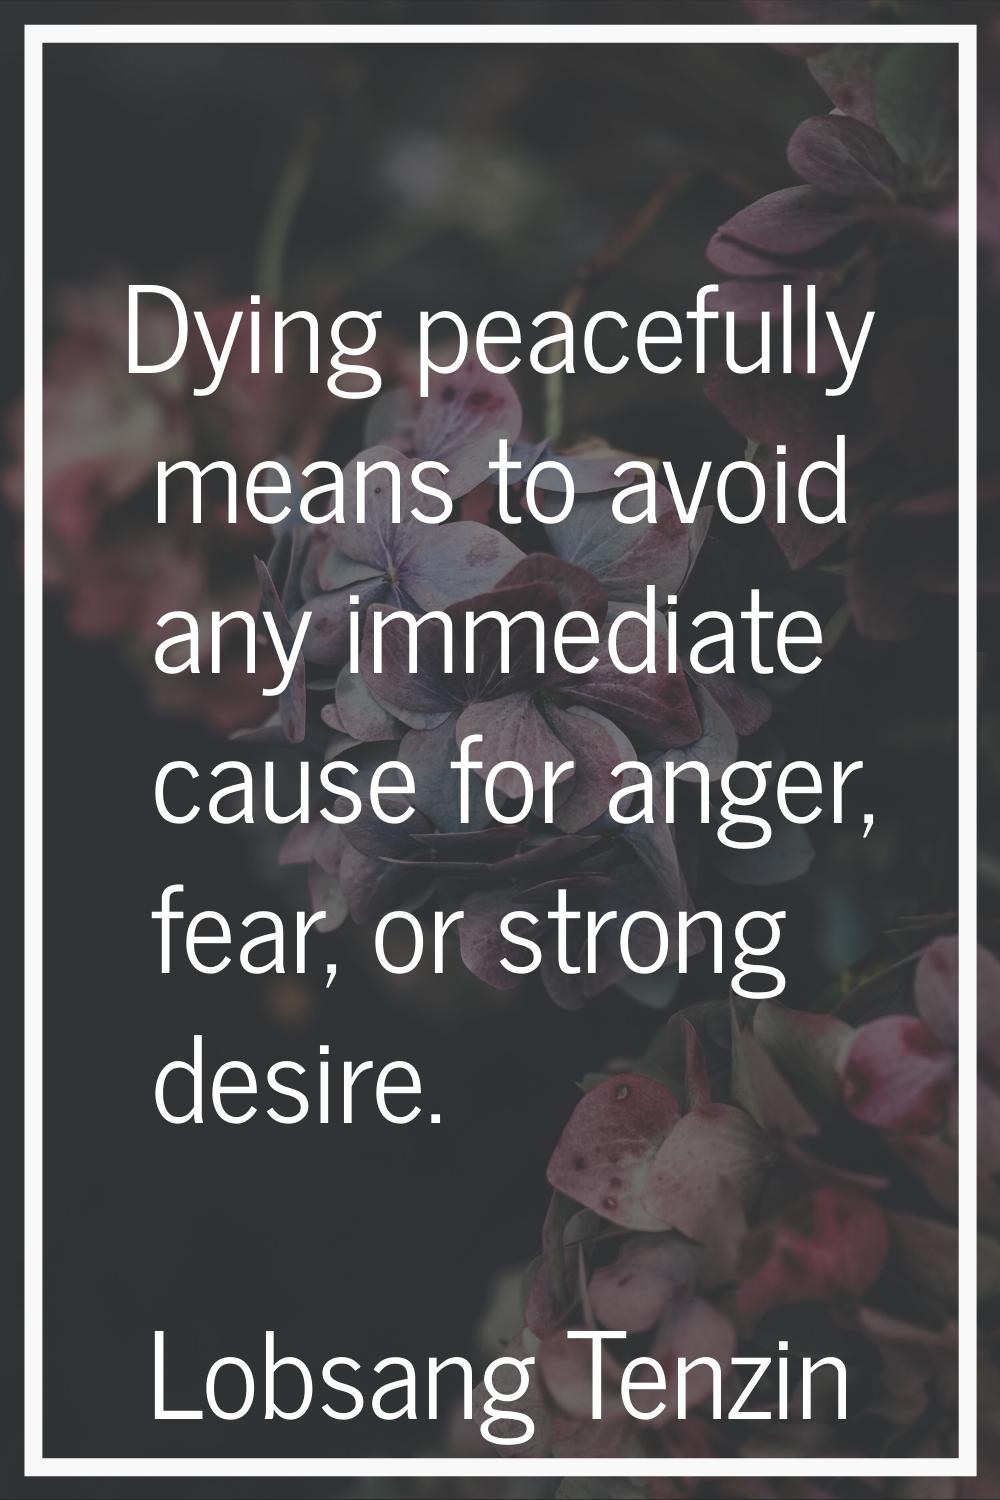 Dying peacefully means to avoid any immediate cause for anger, fear, or strong desire.